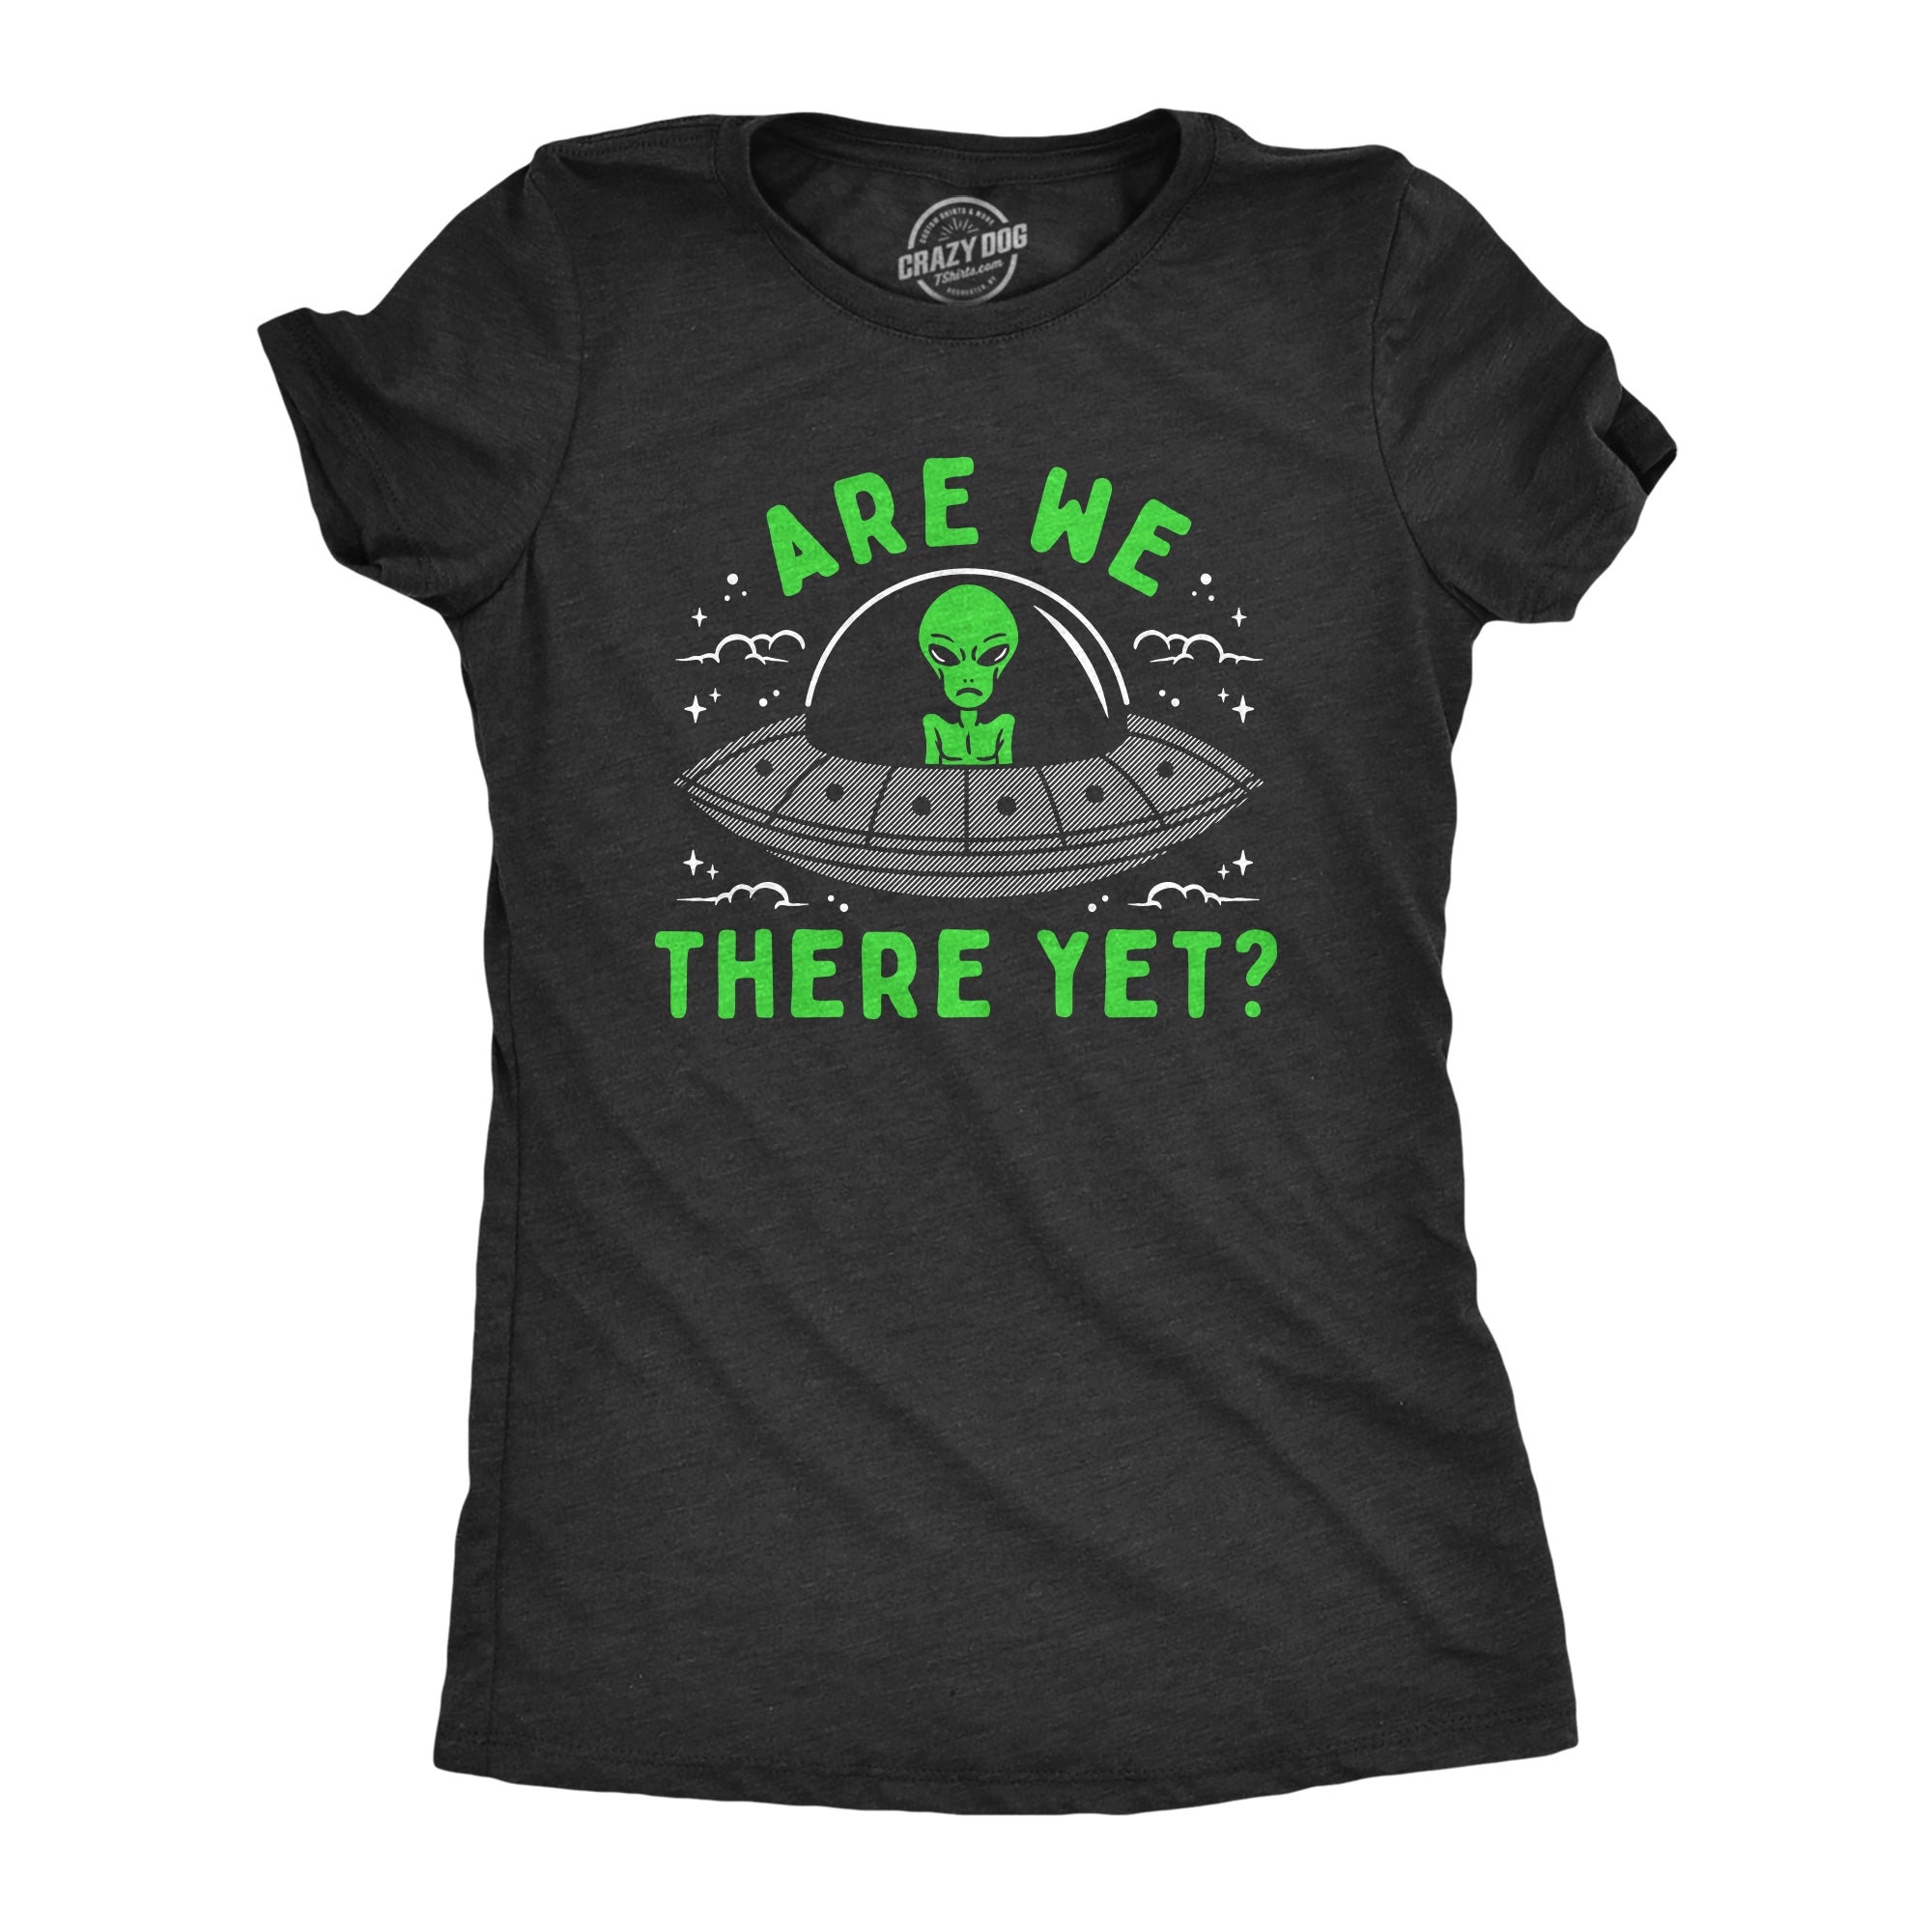 Funny Heather Black - THEREYET Are We There Yet Womens T Shirt Nerdy Space sarcastic Tee